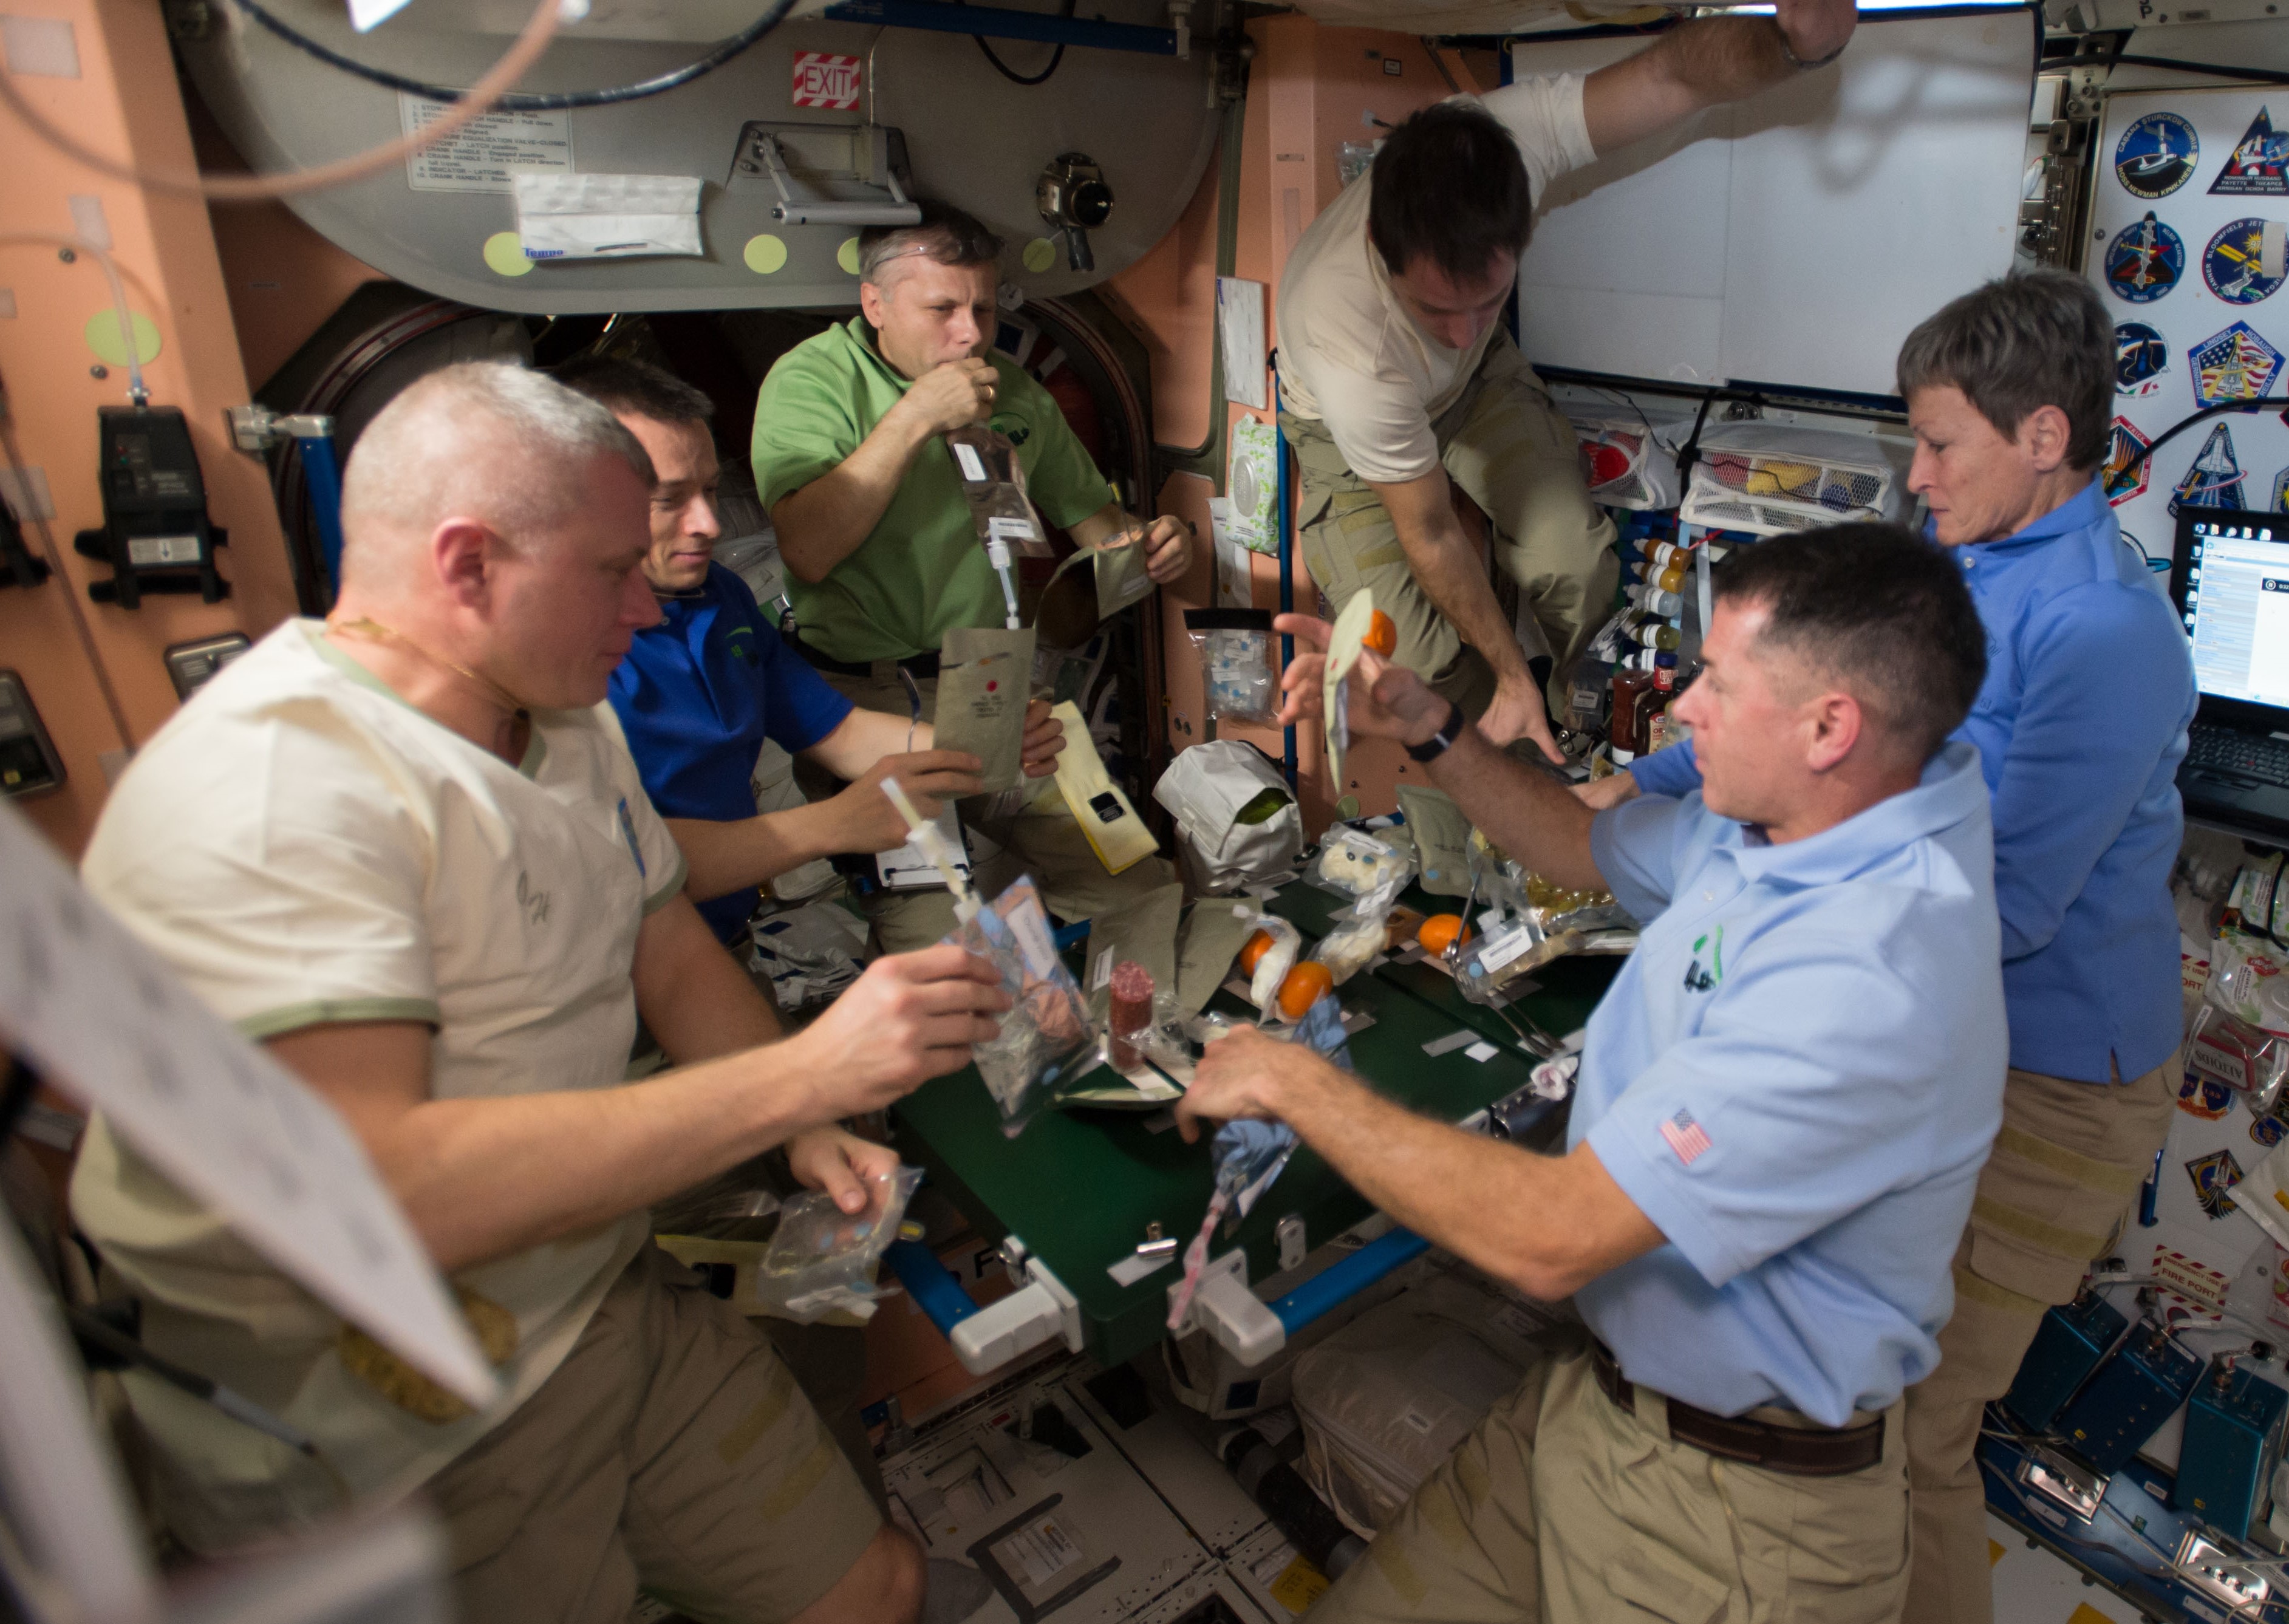 Image of the Expedition 50 crew enjoying Thanksgiving feast